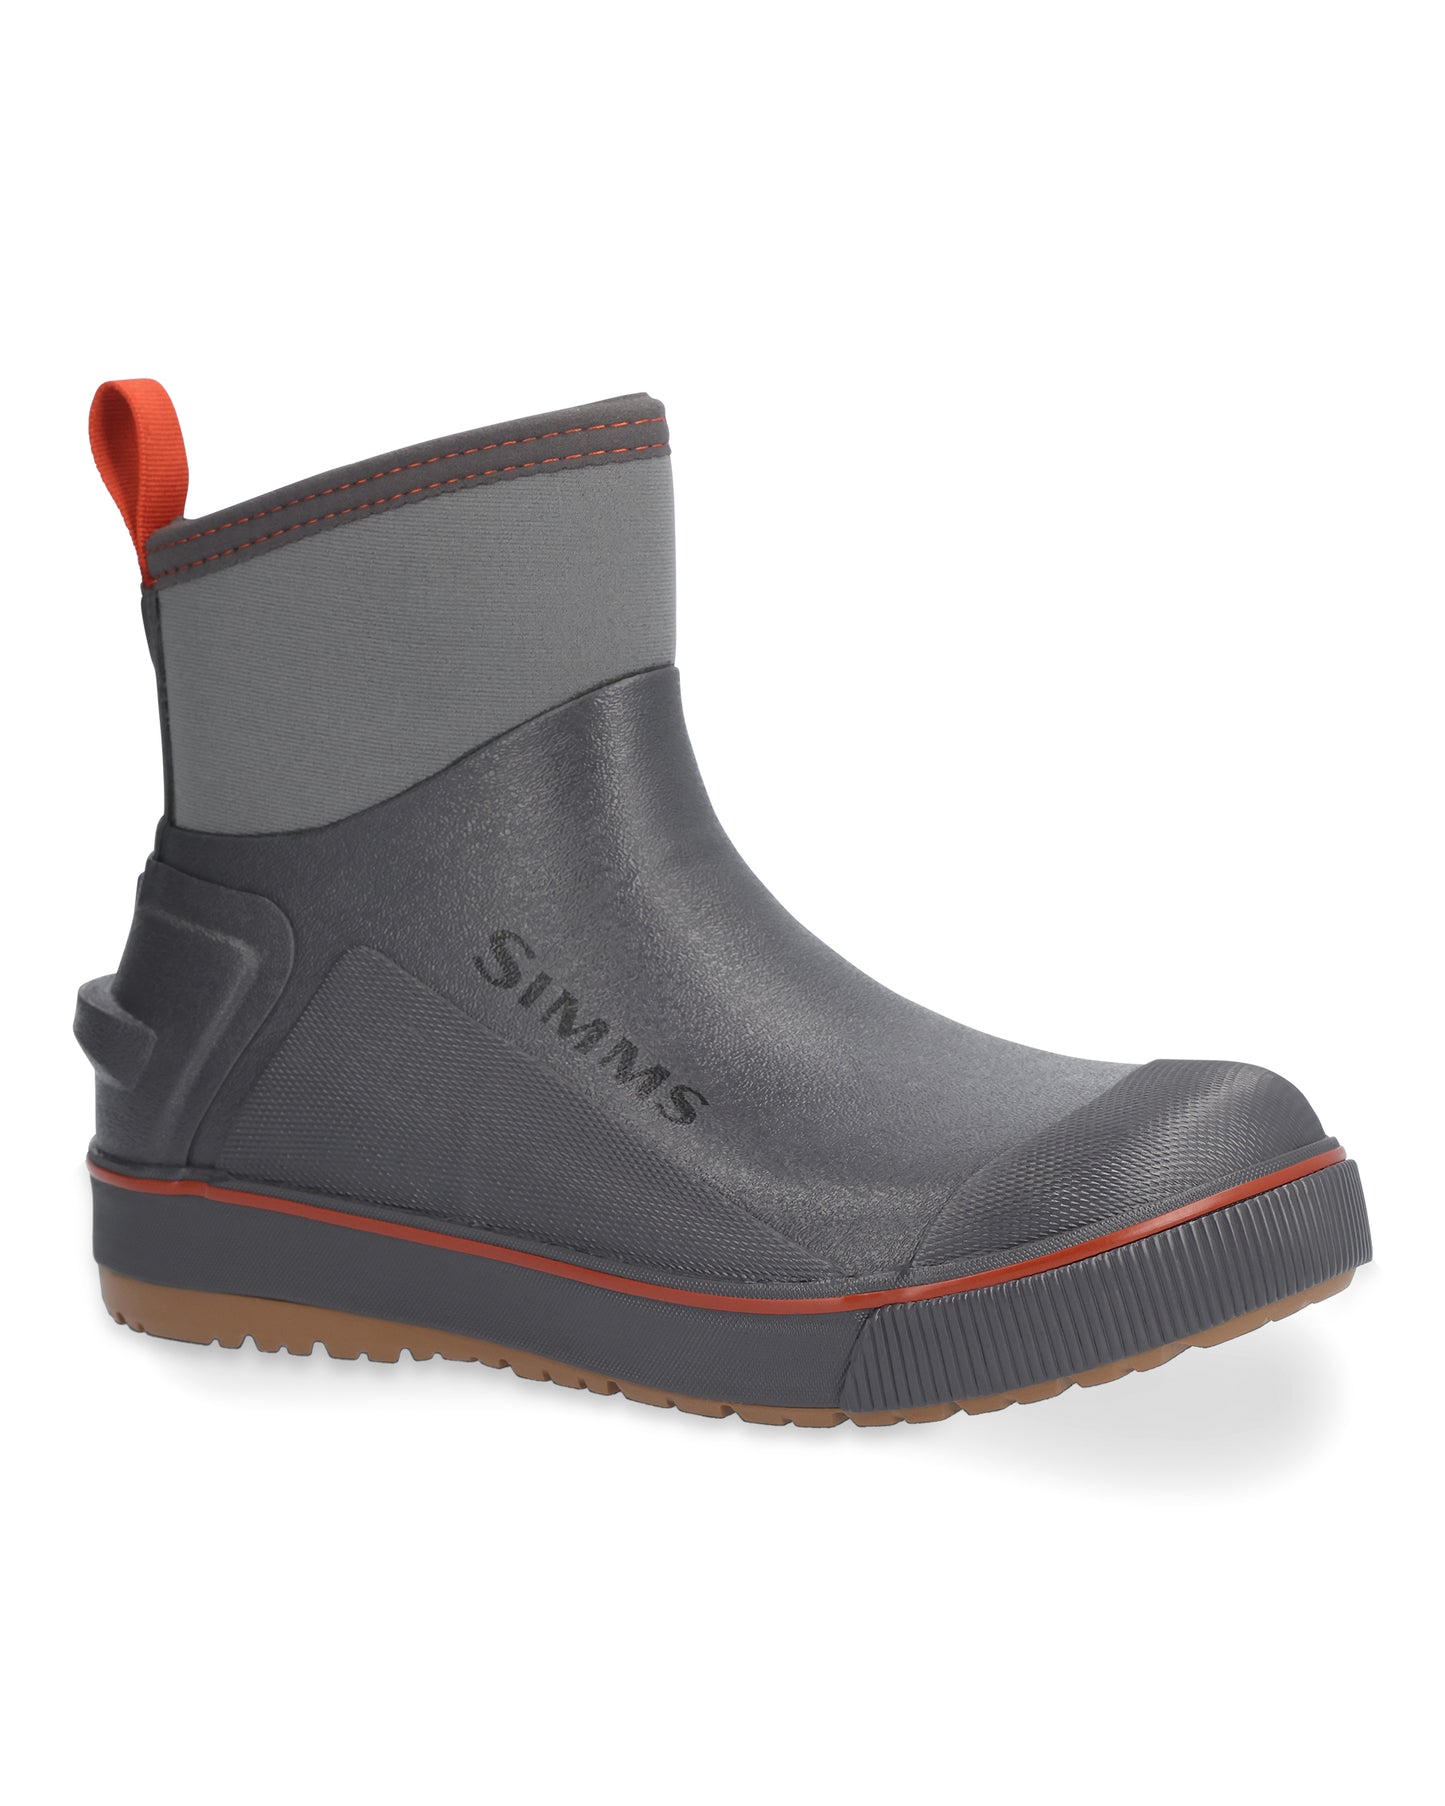    13939-096-Simms-Challenger-7inch-Boot-Tabletop